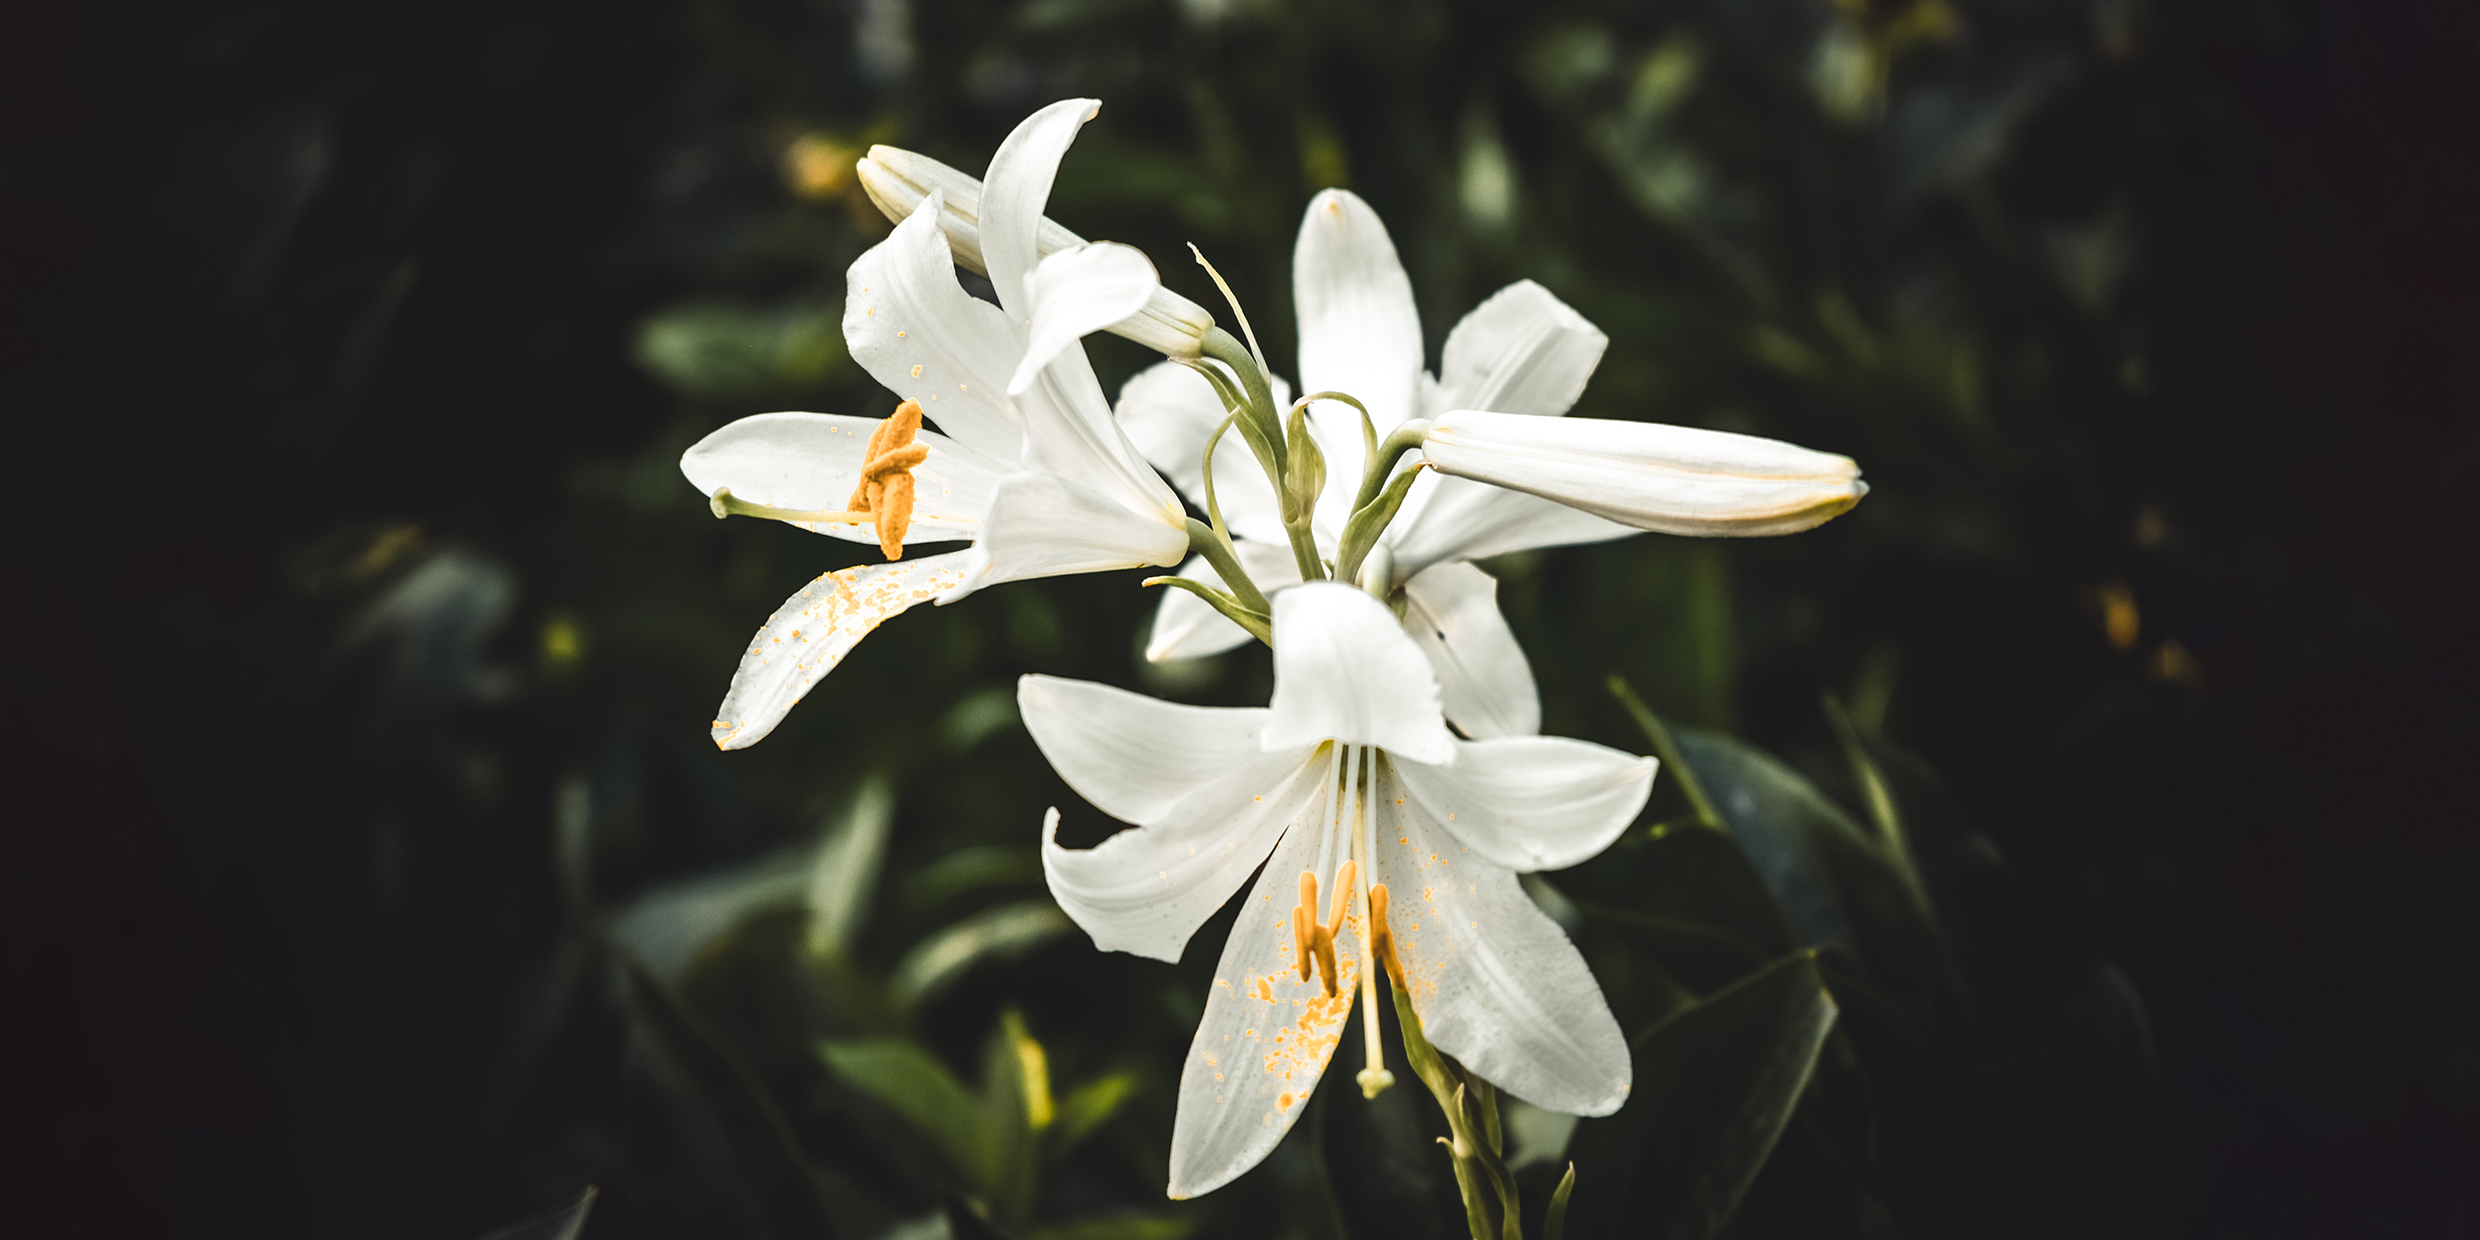 Image of white lily flowers in bloom